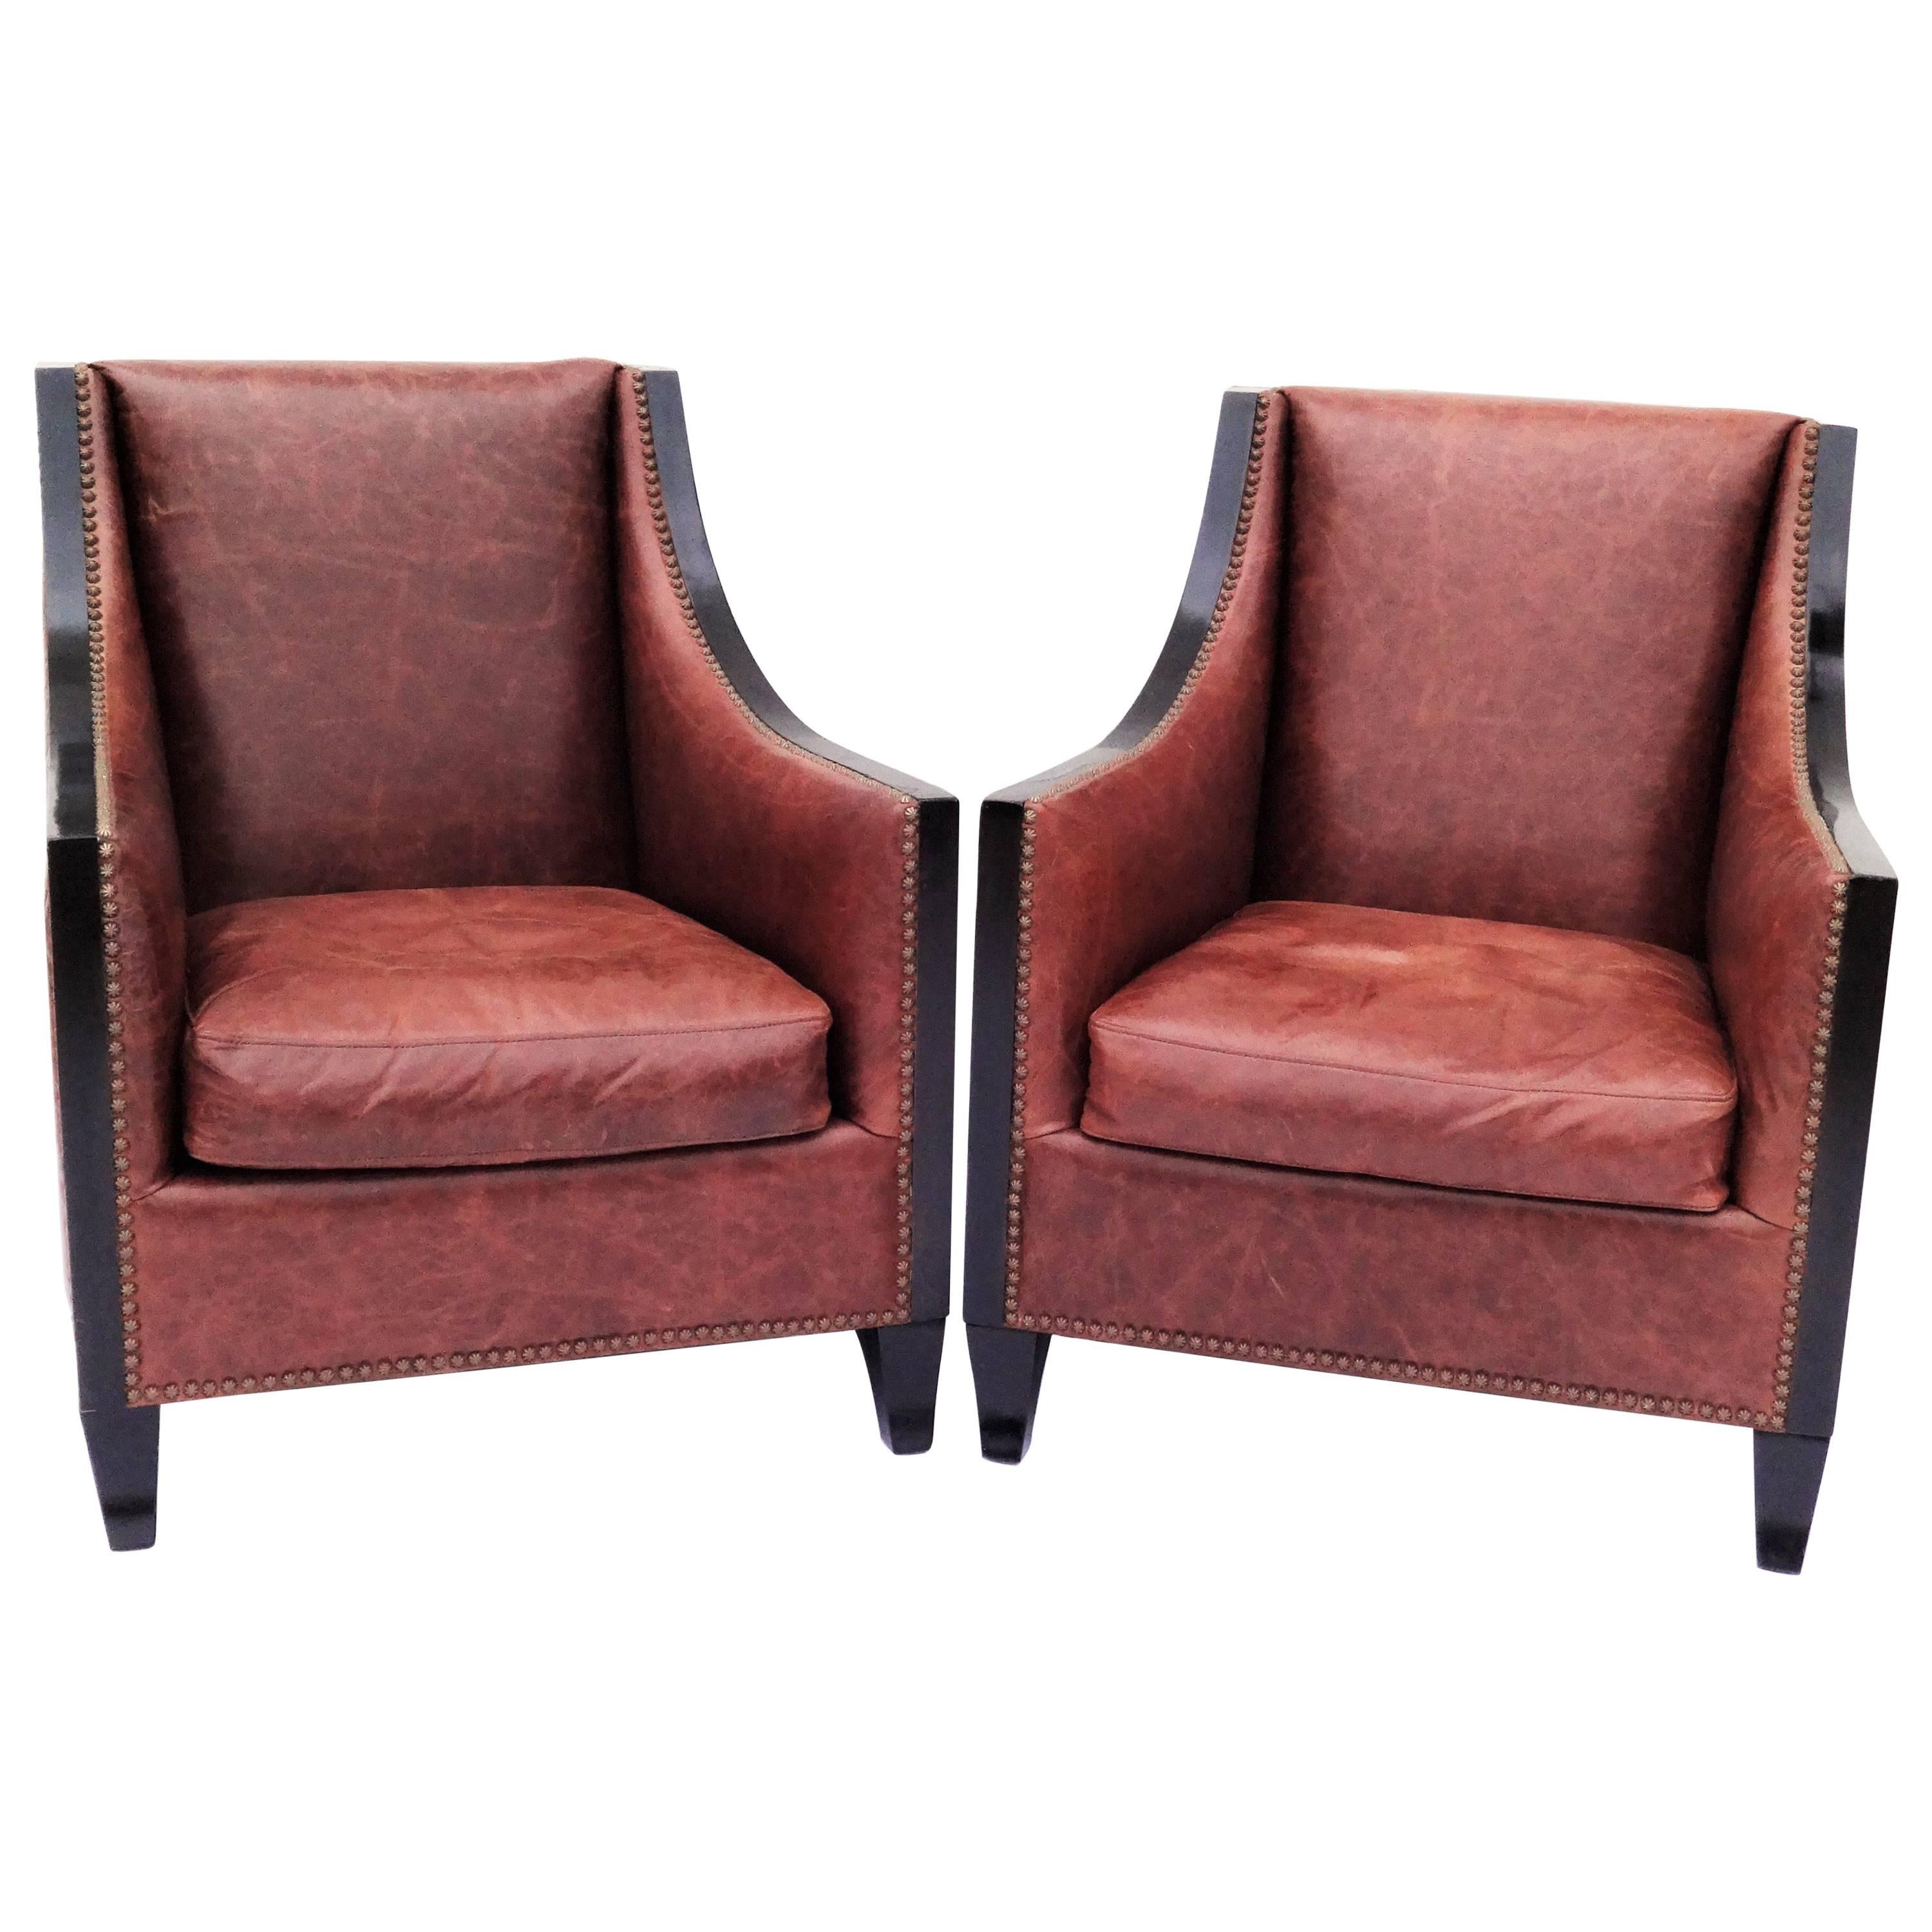 Pair of High Back Leather Club Chairs For Sale